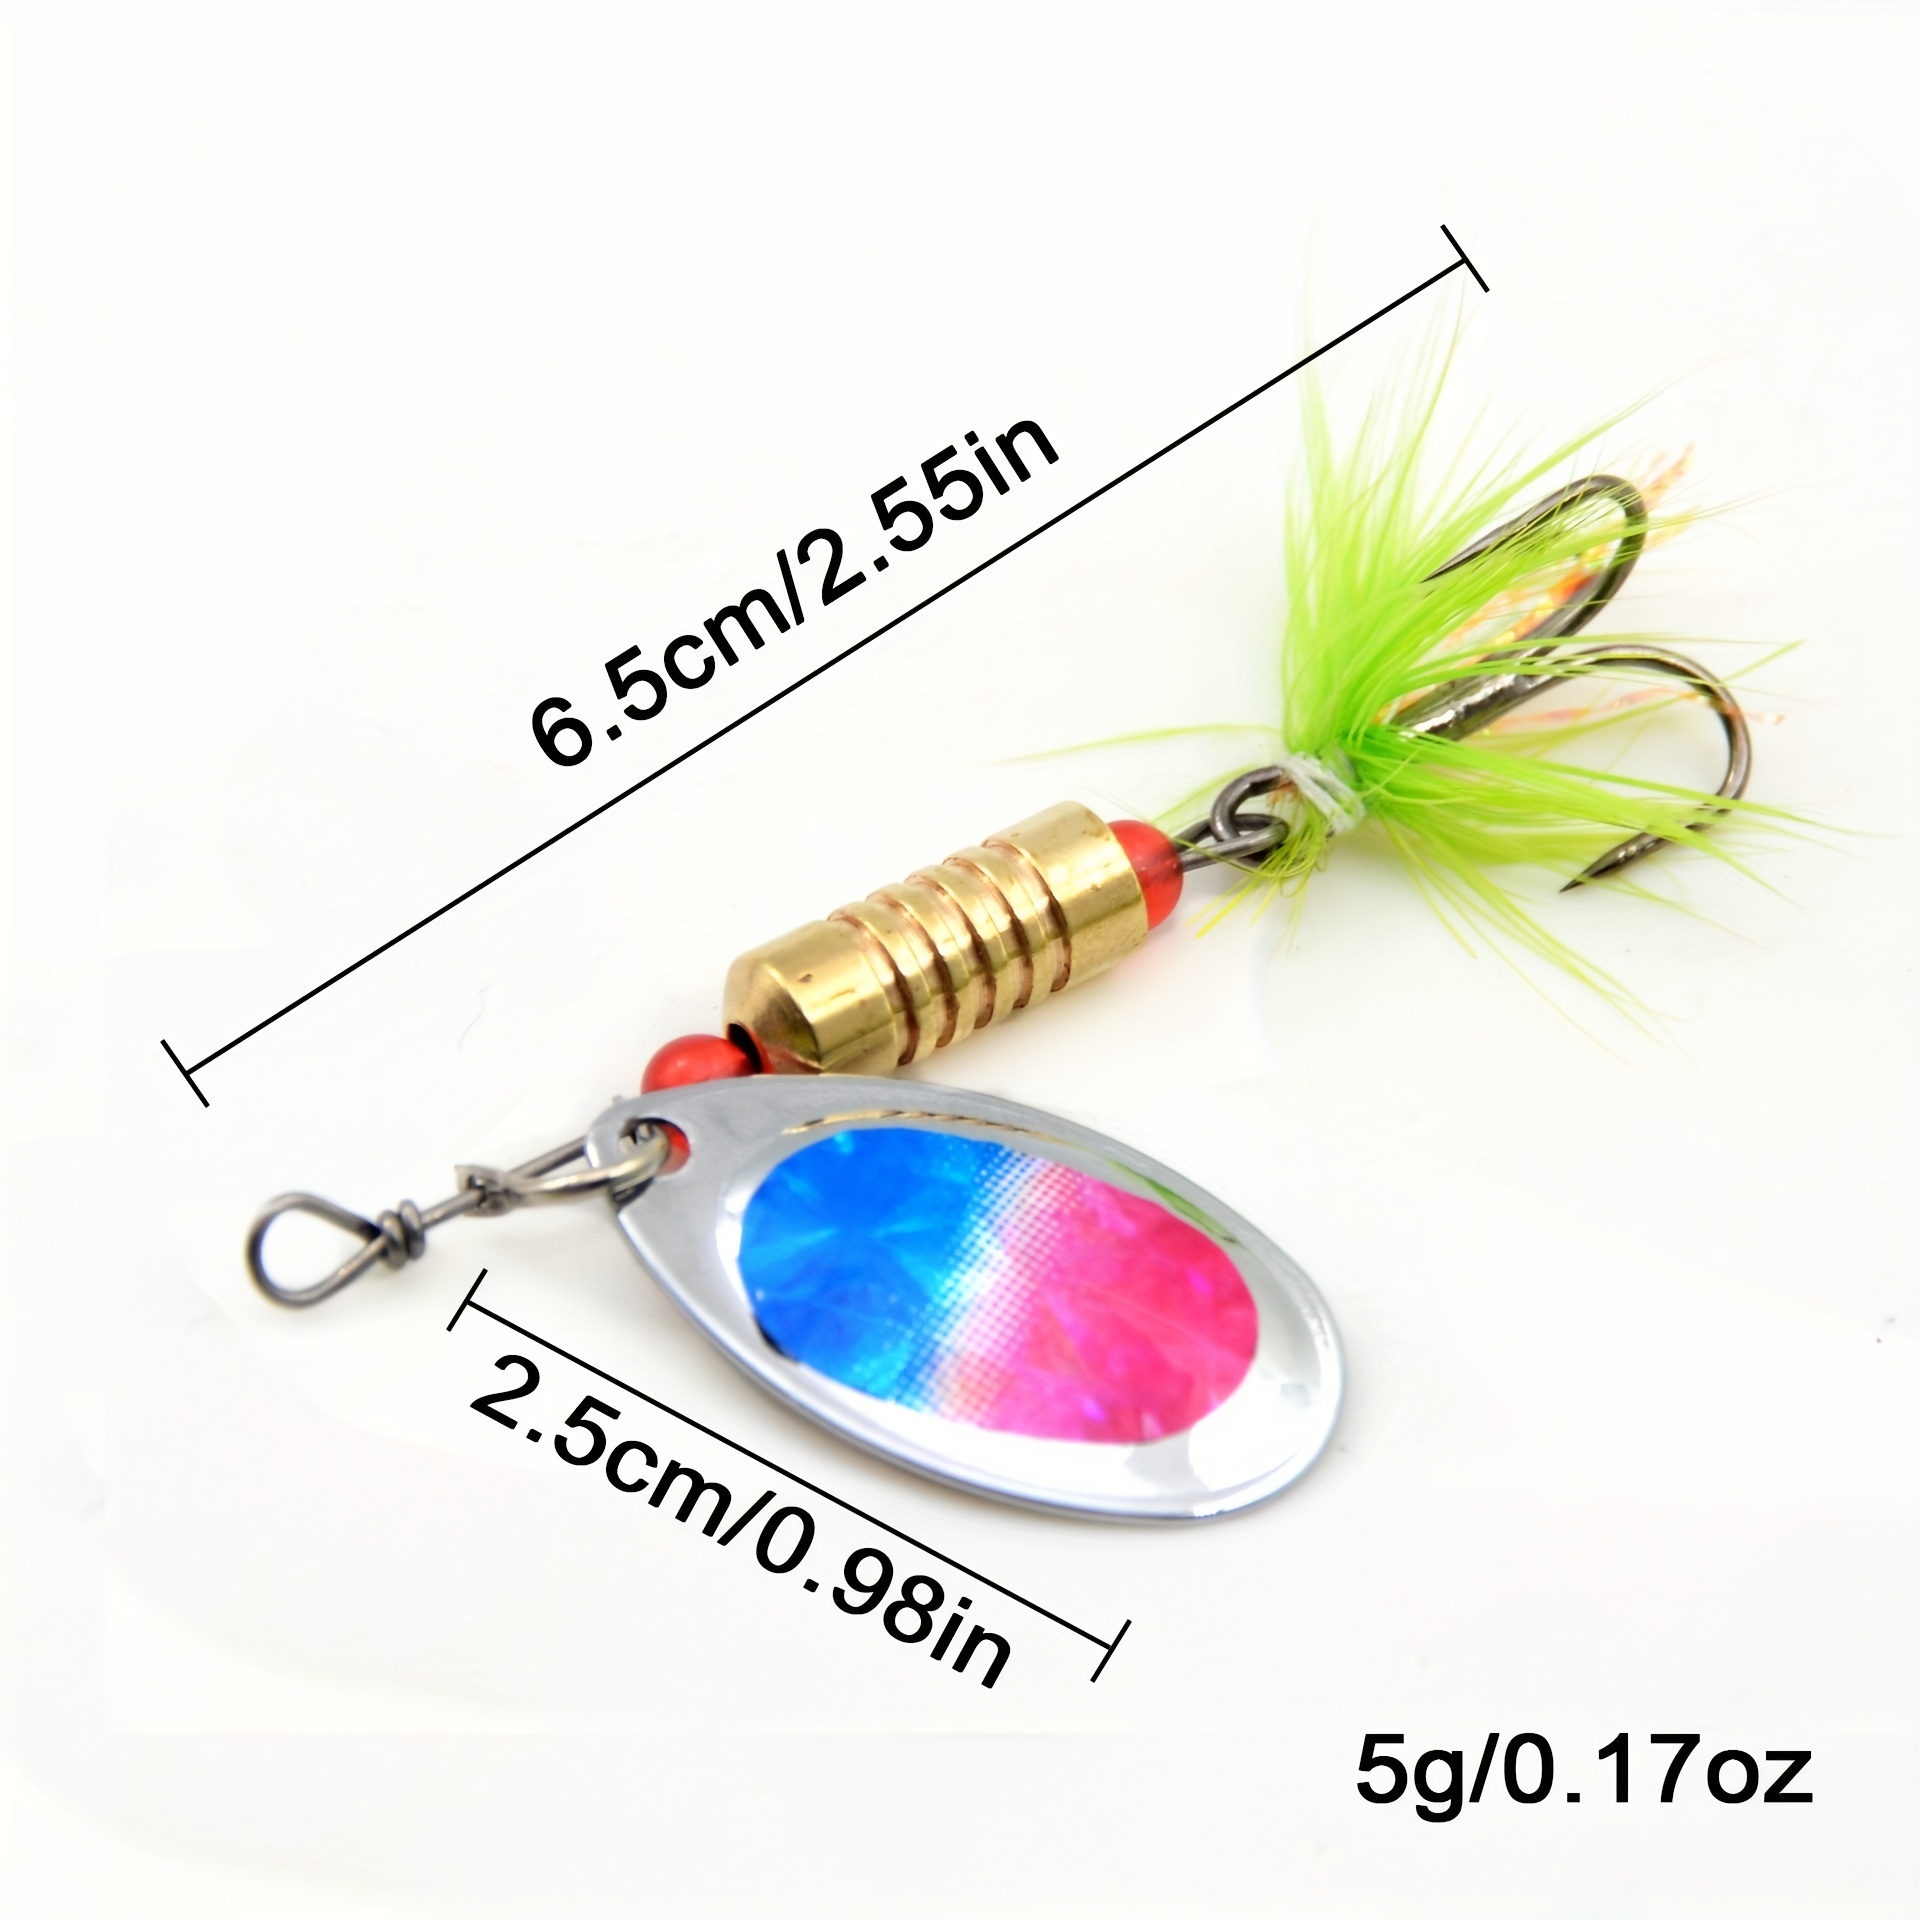 Fishing Lures 10 PCS Spinner Lures Baits with Tackle Box Bass Trout Salmon  Hard Metal Rooster Tail Fishing Lures Kit 